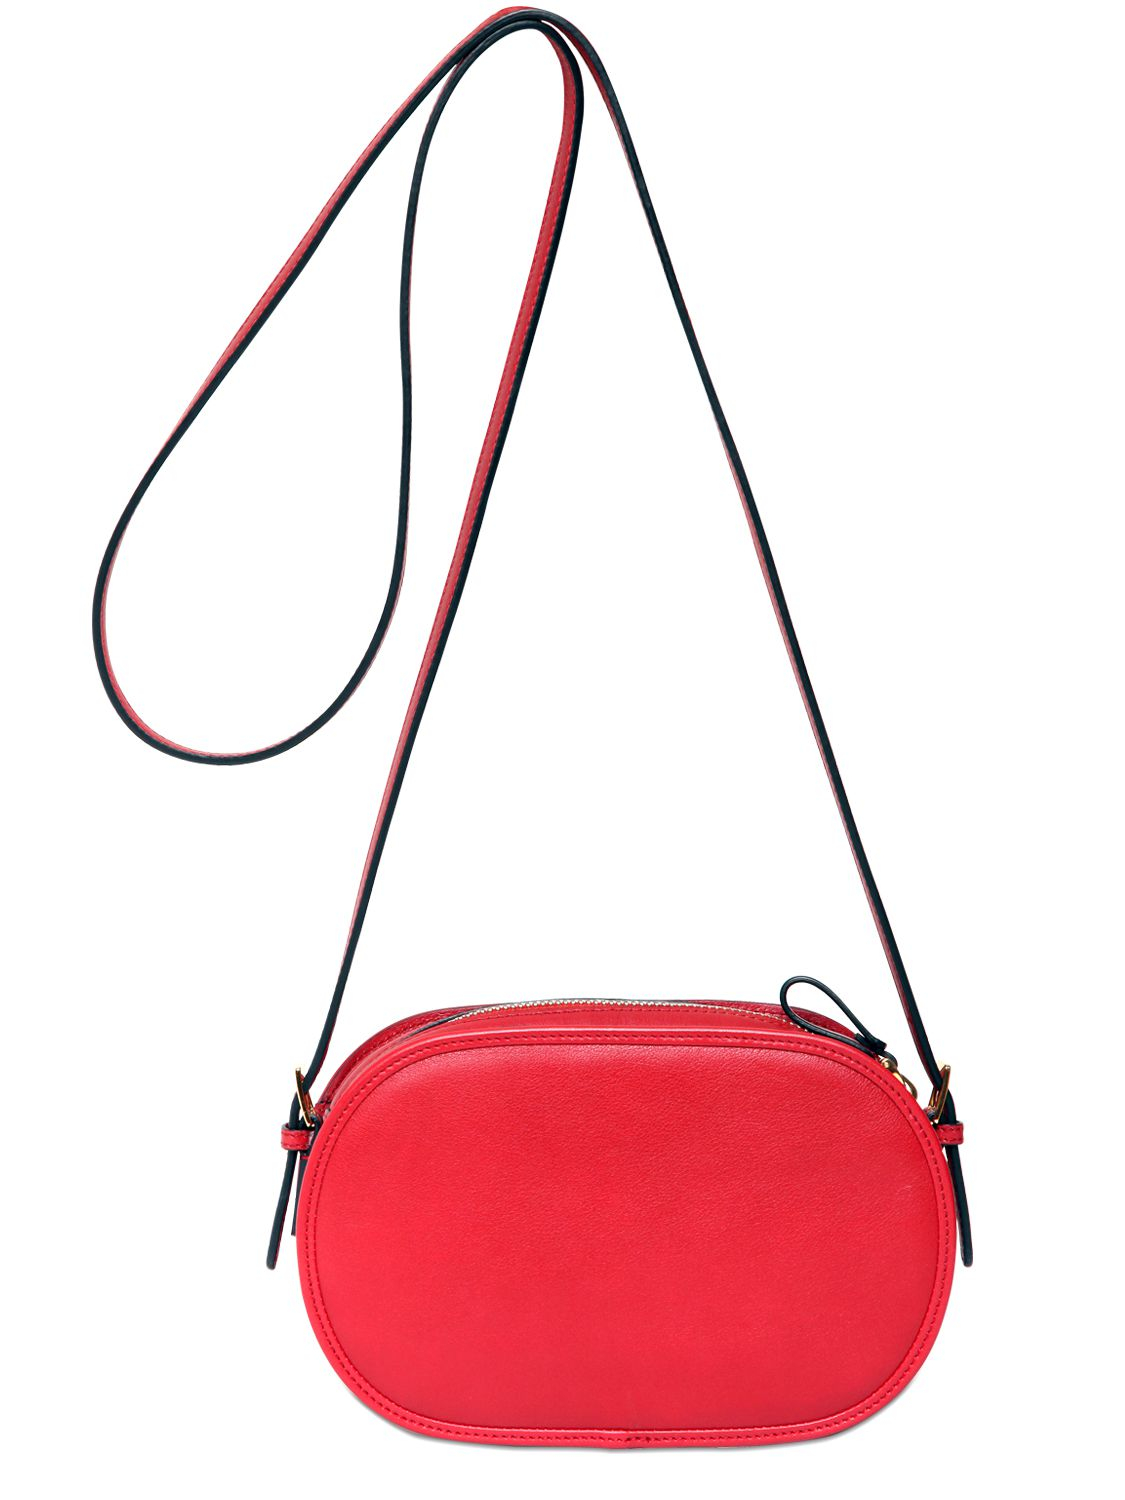 Valentino Go Leather Shoulder Bag in Red | Lyst